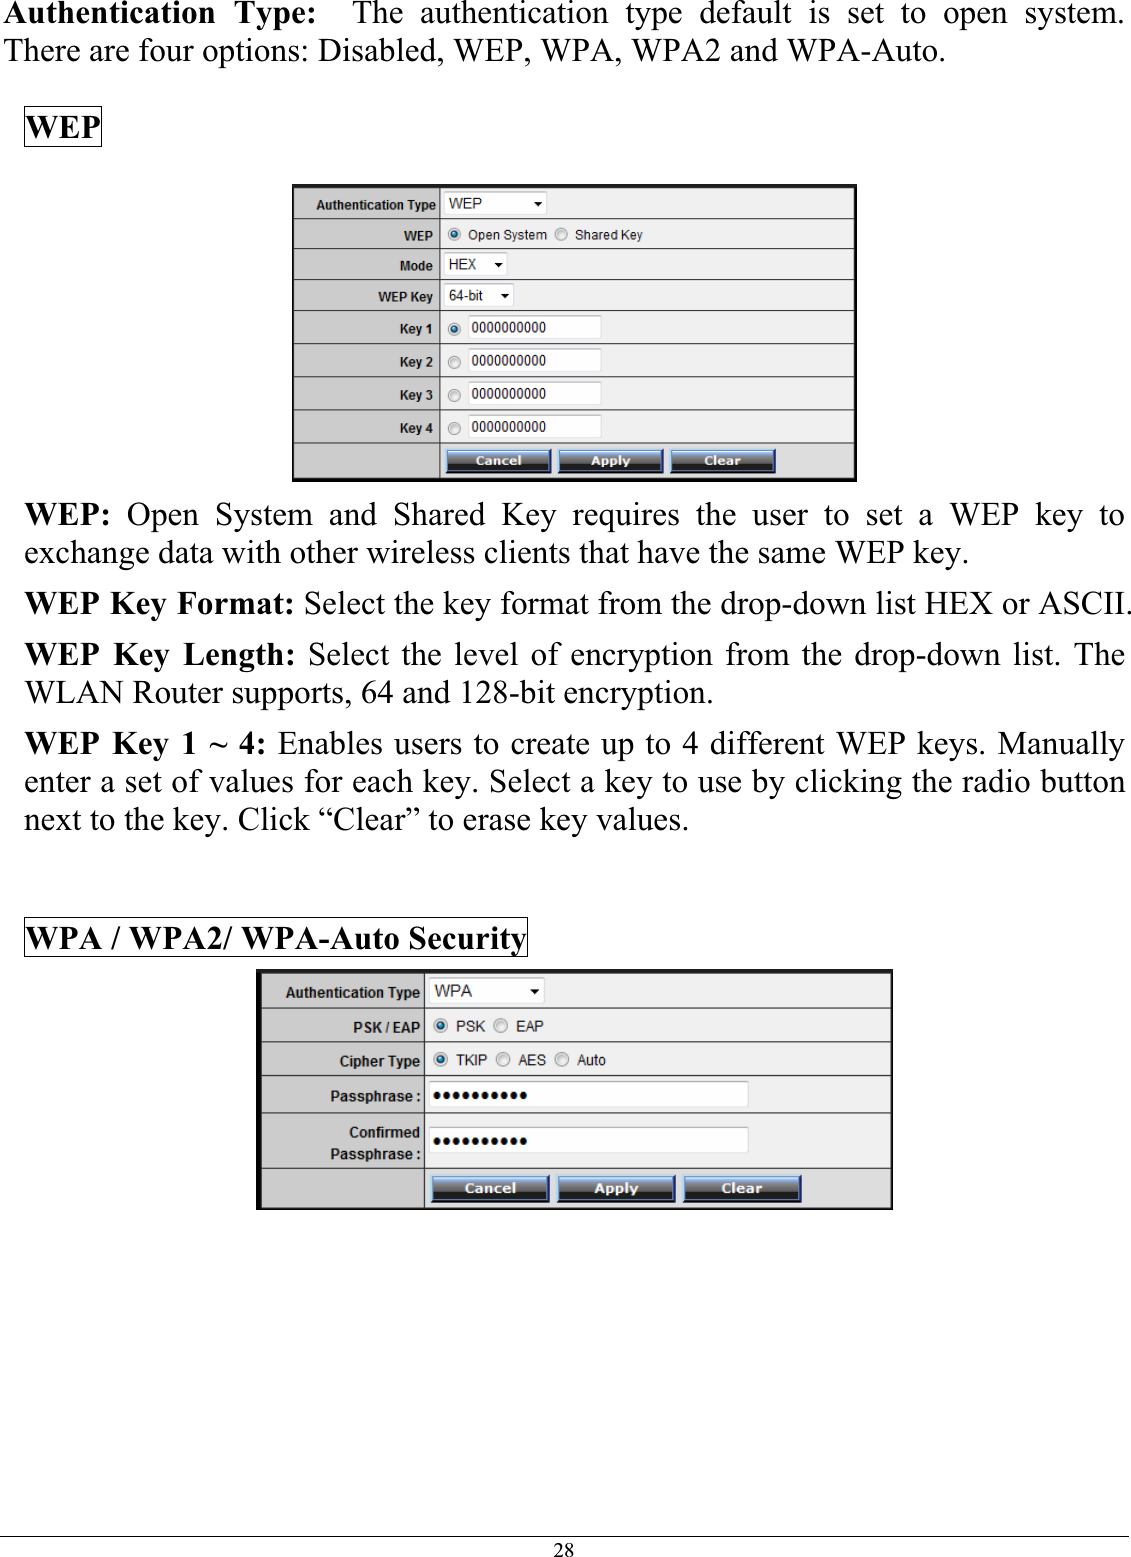 28Authentication Type: The authentication type default is set to open system.  There are four options: Disabled, WEP, WPA, WPA2 and WPA-Auto. WEP WEP: Open System and Shared Key requires the user to set a WEP key to exchange data with other wireless clients that have the same WEP key. WEP Key Format: Select the key format from the drop-down list HEX or ASCII. WEP Key Length: Select the level of encryption from the drop-down list. The WLAN Router supports, 64 and 128-bit encryption. WEP Key 1 ~ 4: Enables users to create up to 4 different WEP keys. Manually enter a set of values for each key. Select a key to use by clicking the radio button next to the key. Click “Clear” to erase key values. WPA / WPA2/ WPA-Auto Security 